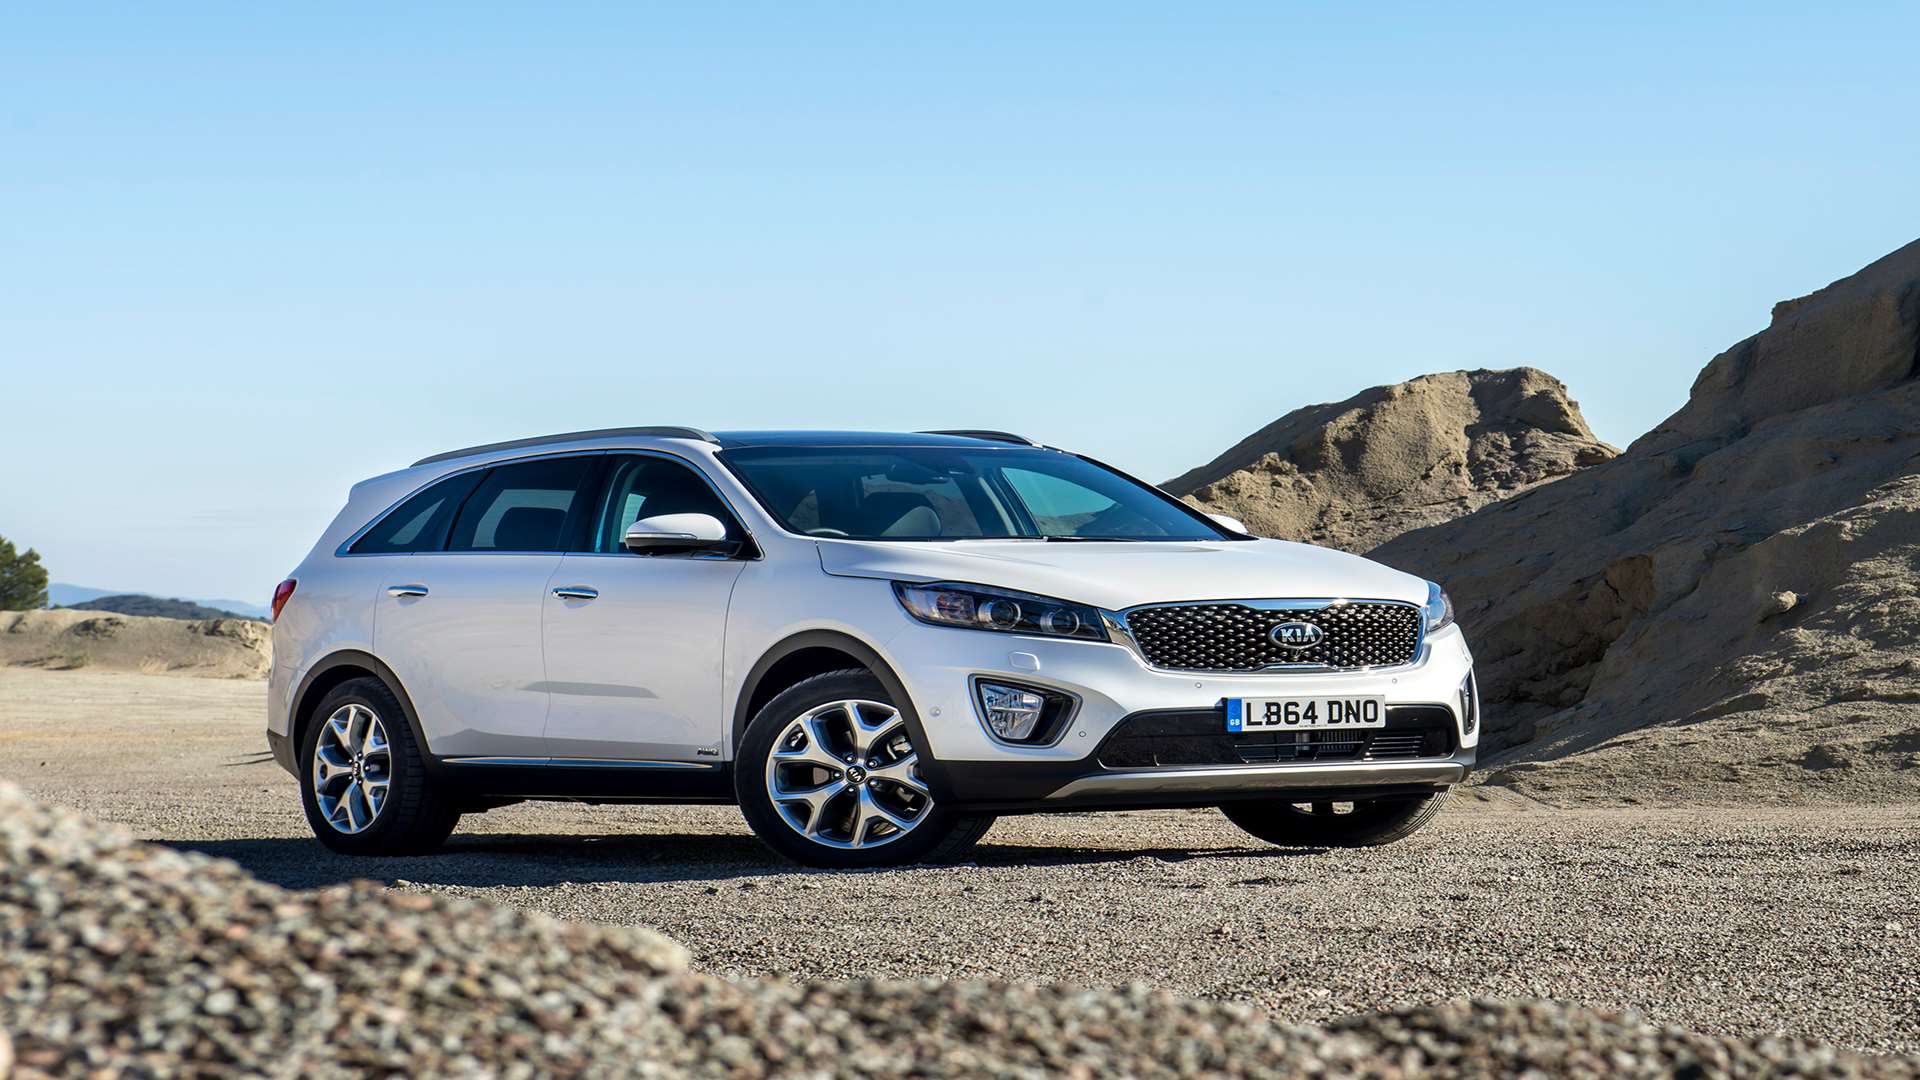 The styling does a good job of disguising the Sorento’s bulk